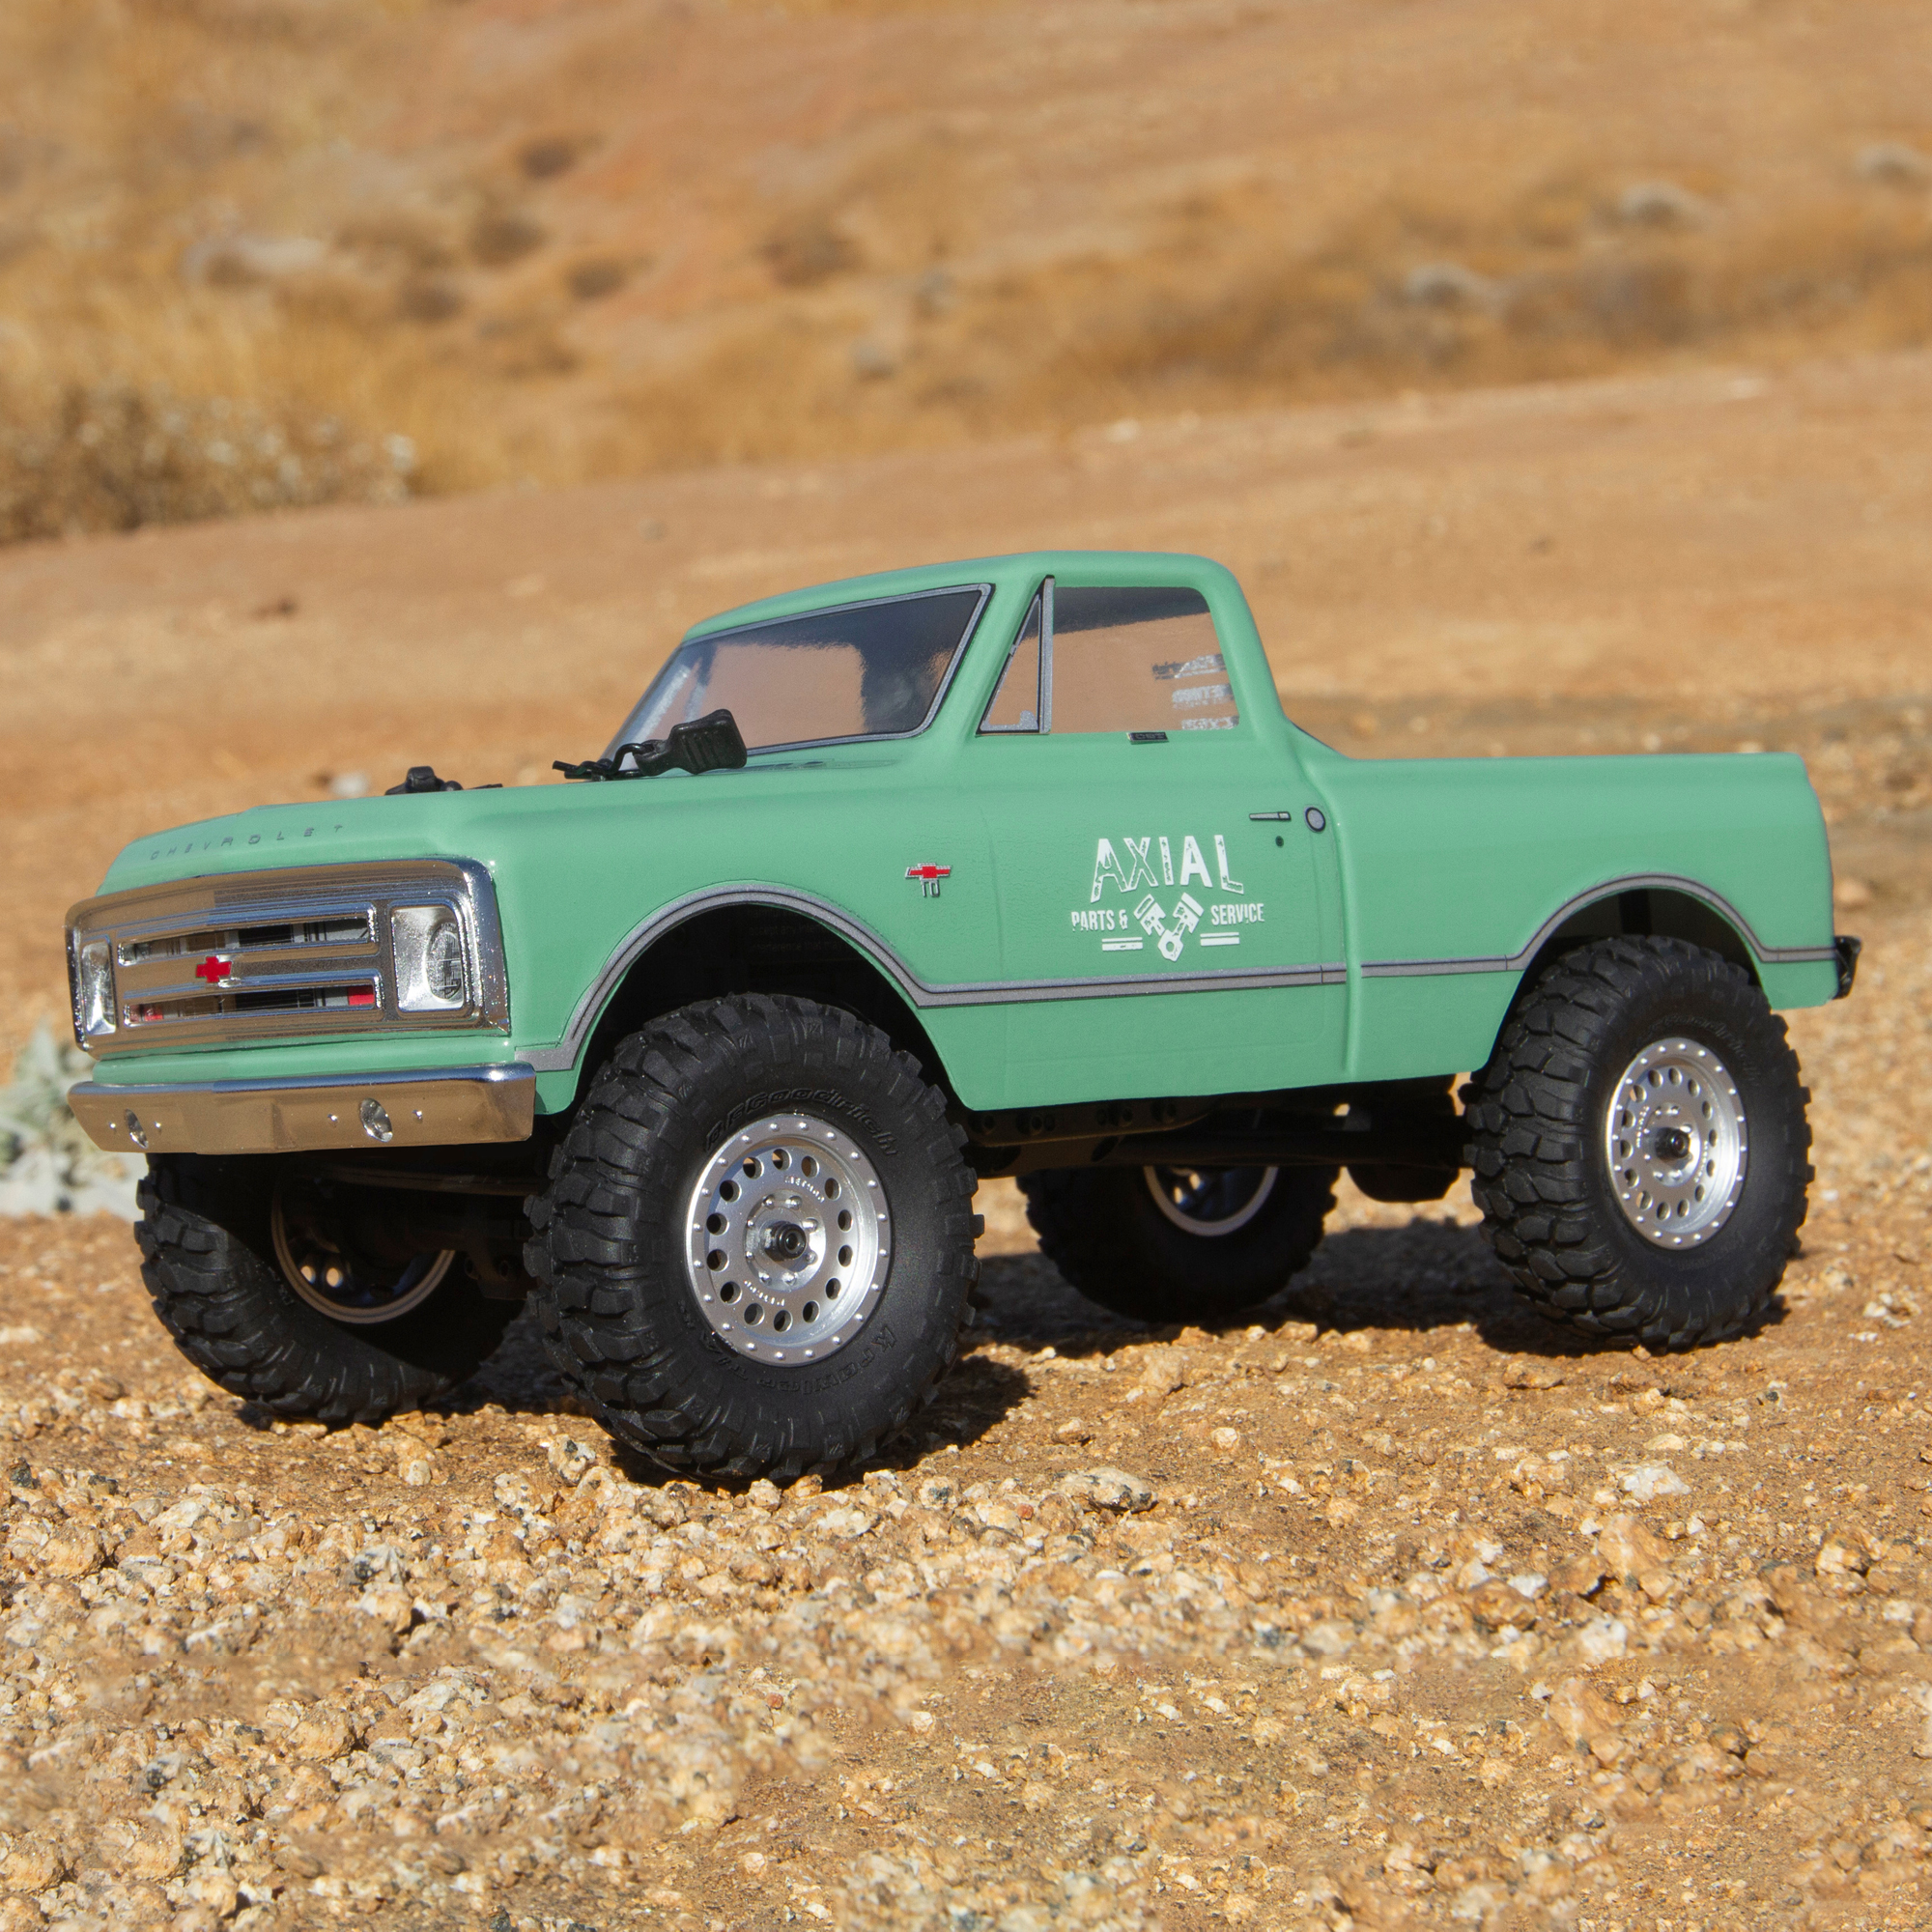 Axial 1/24 SCX24 1967 Chevrolet C10 4 Wheel Drive Truck Brushed RTR Ready to Run Green AXI00001T1 Trucks Electric RTR Other - image 3 of 9